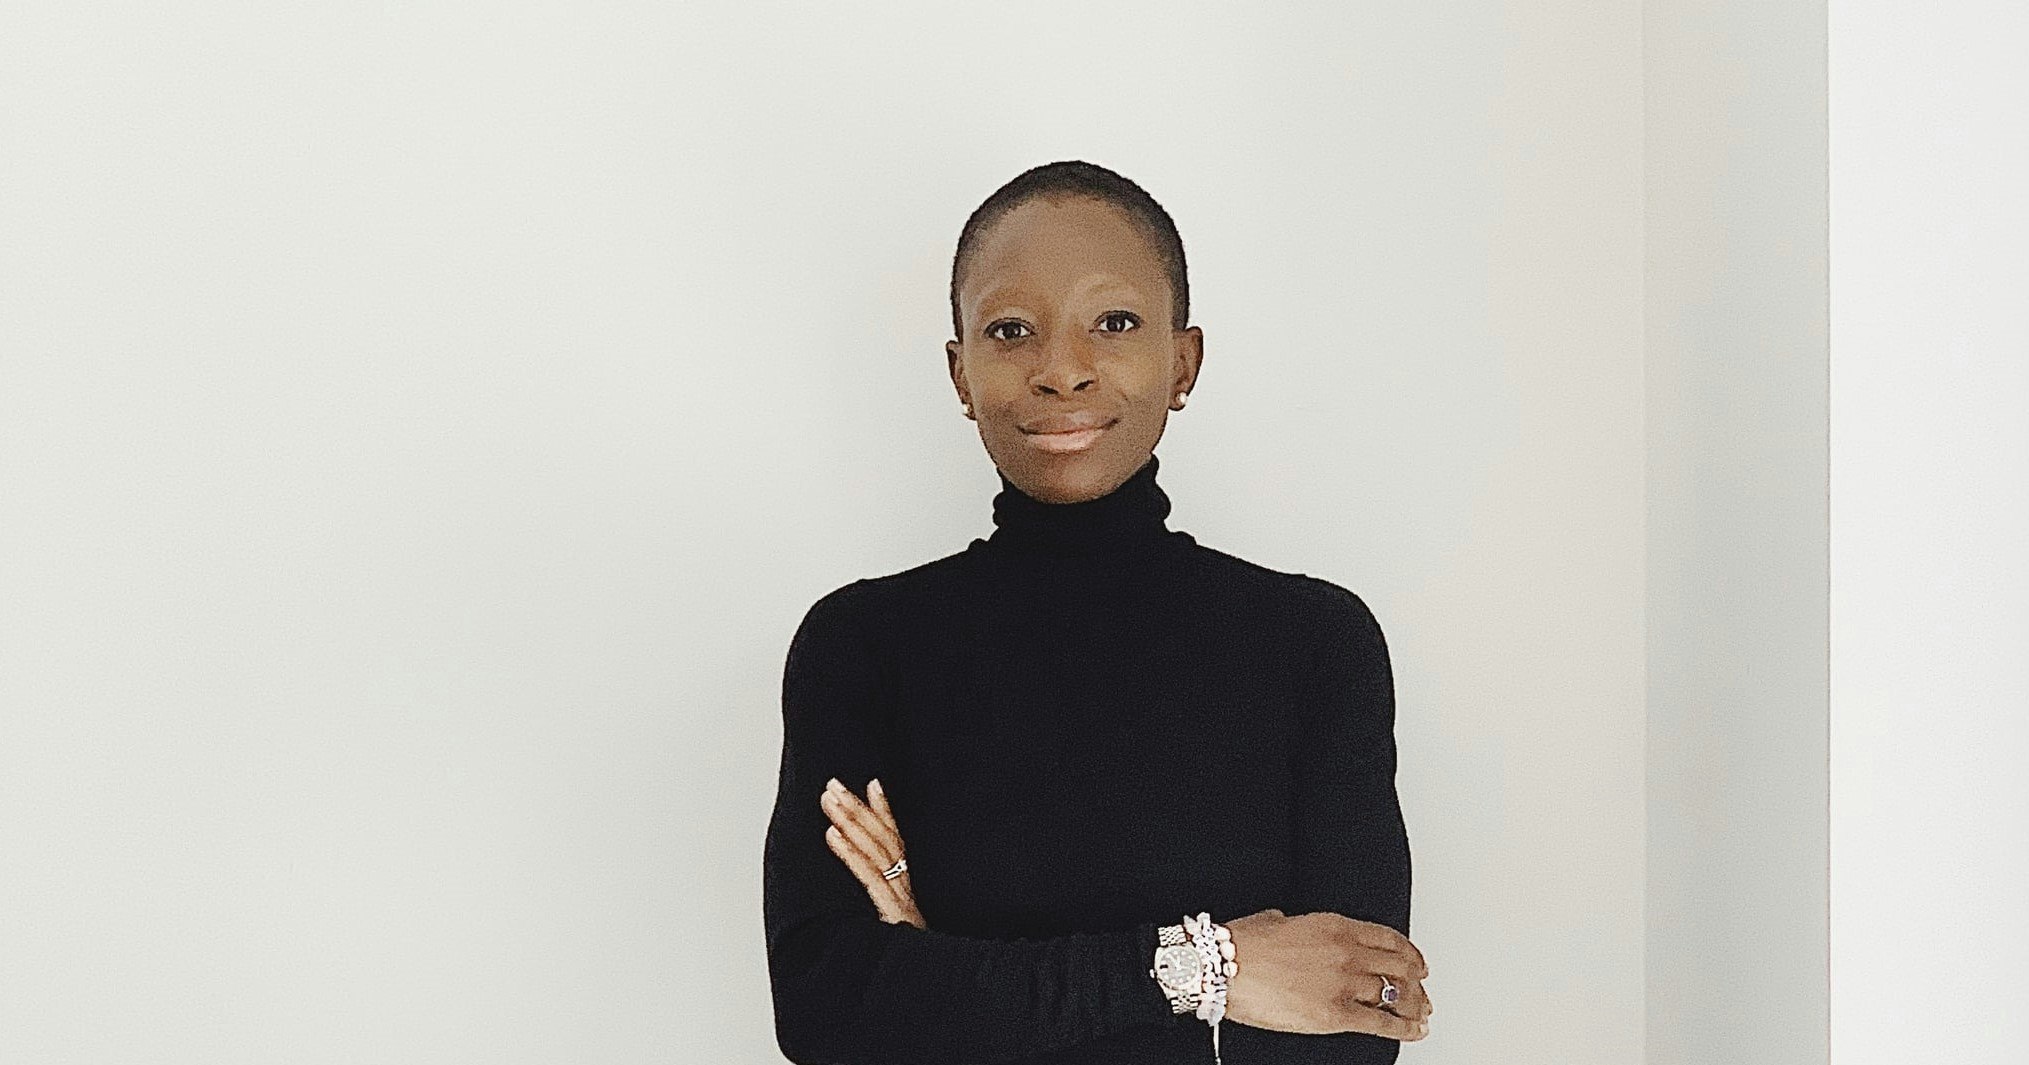 Simi Lindgren, founder of Yuty, which received funding from the Black Founders Fund